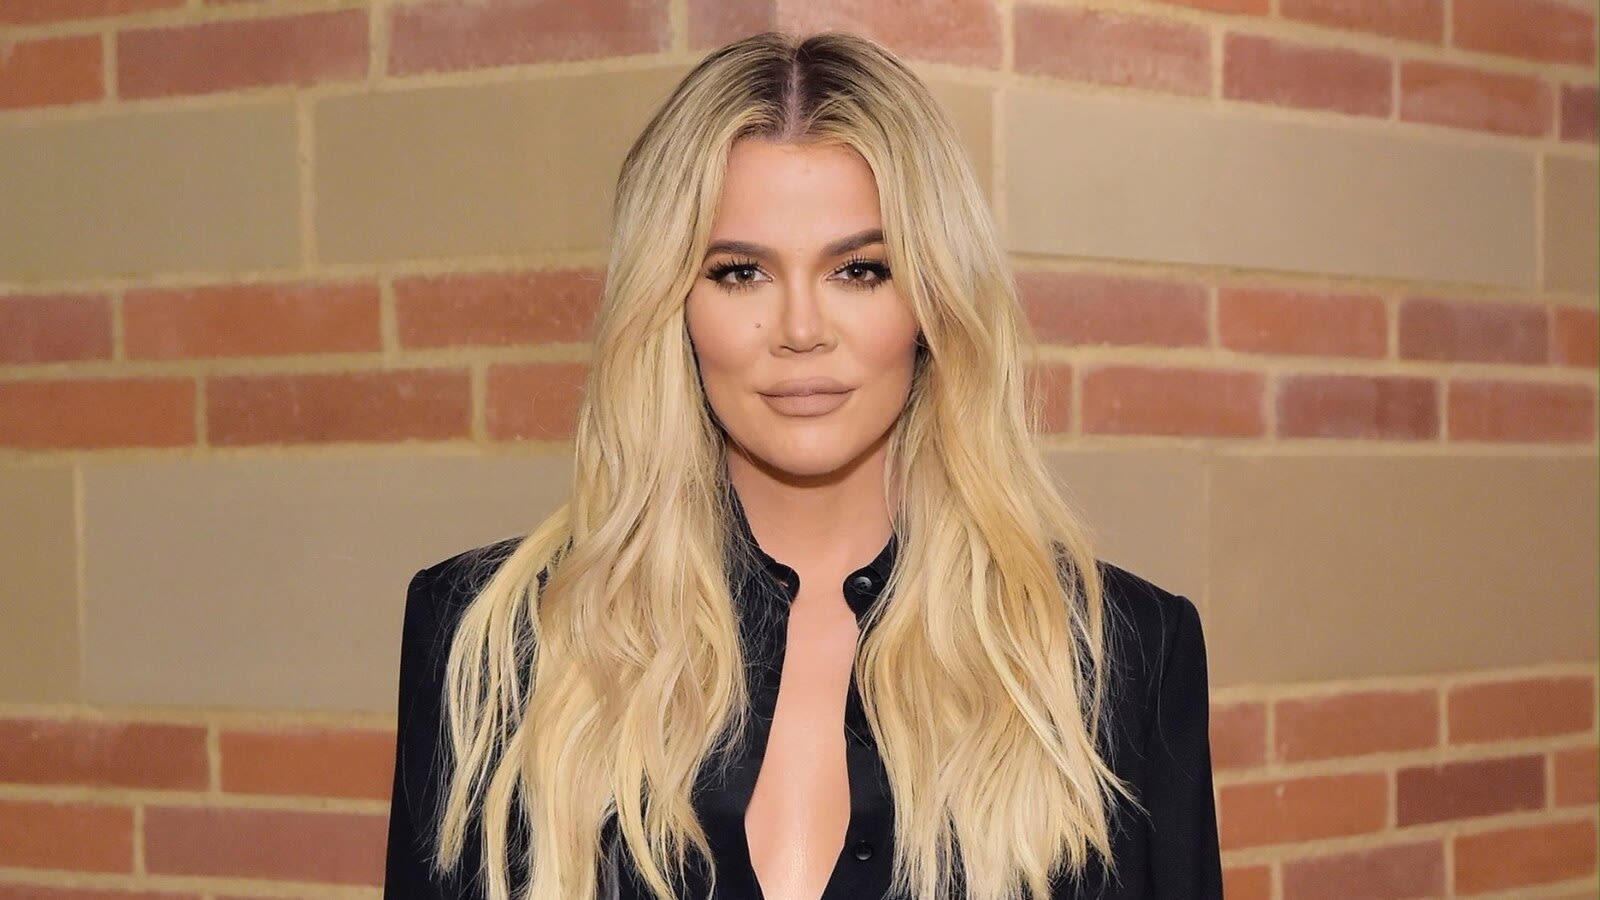 Khloé Kardashian says she was a 'major emotional eater': What to know about the behavior